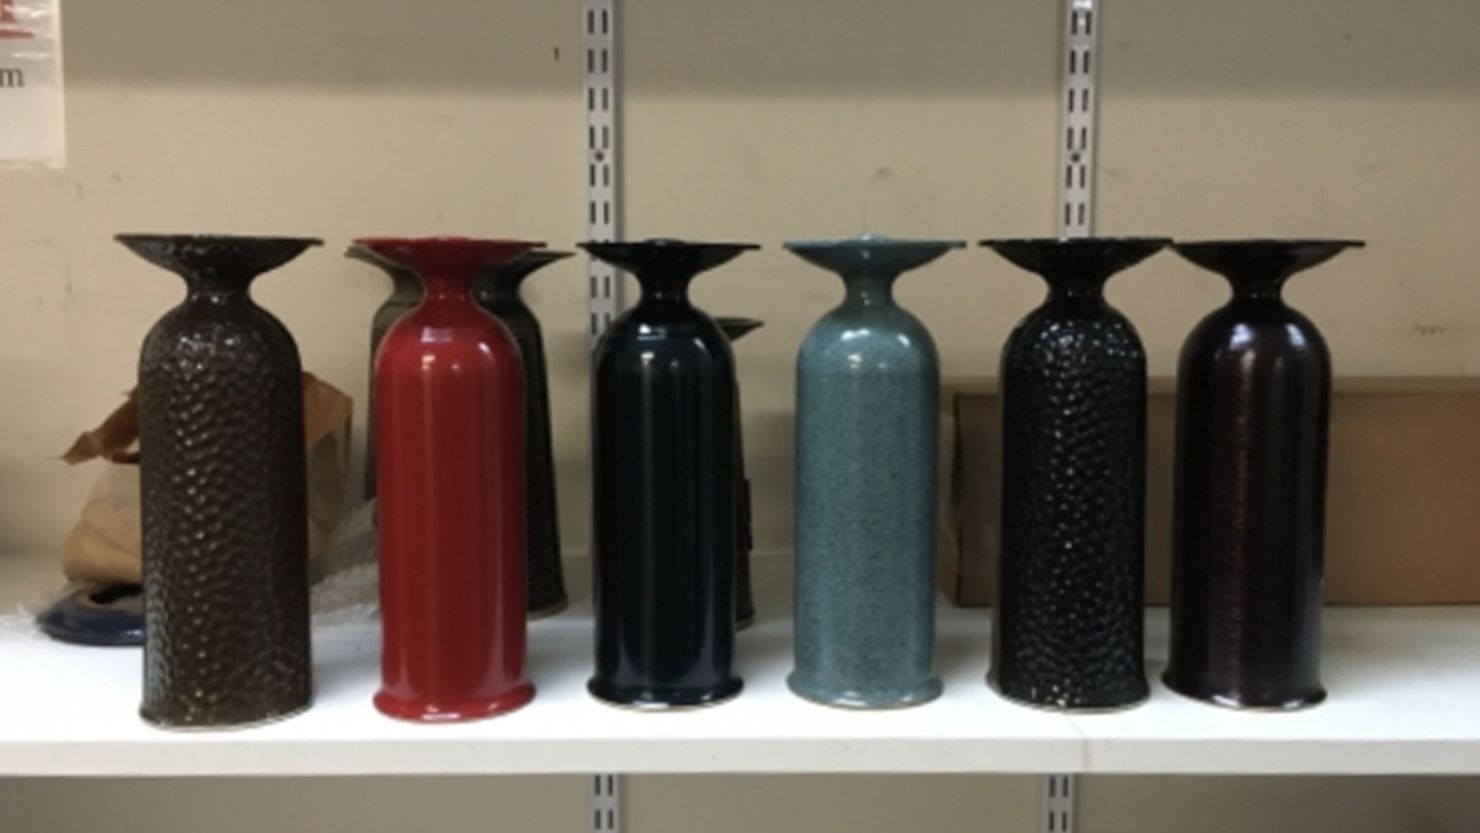 These were the types of vases stolen from the Greenlawn Memorial Park in Fort Wayne, Indiana.